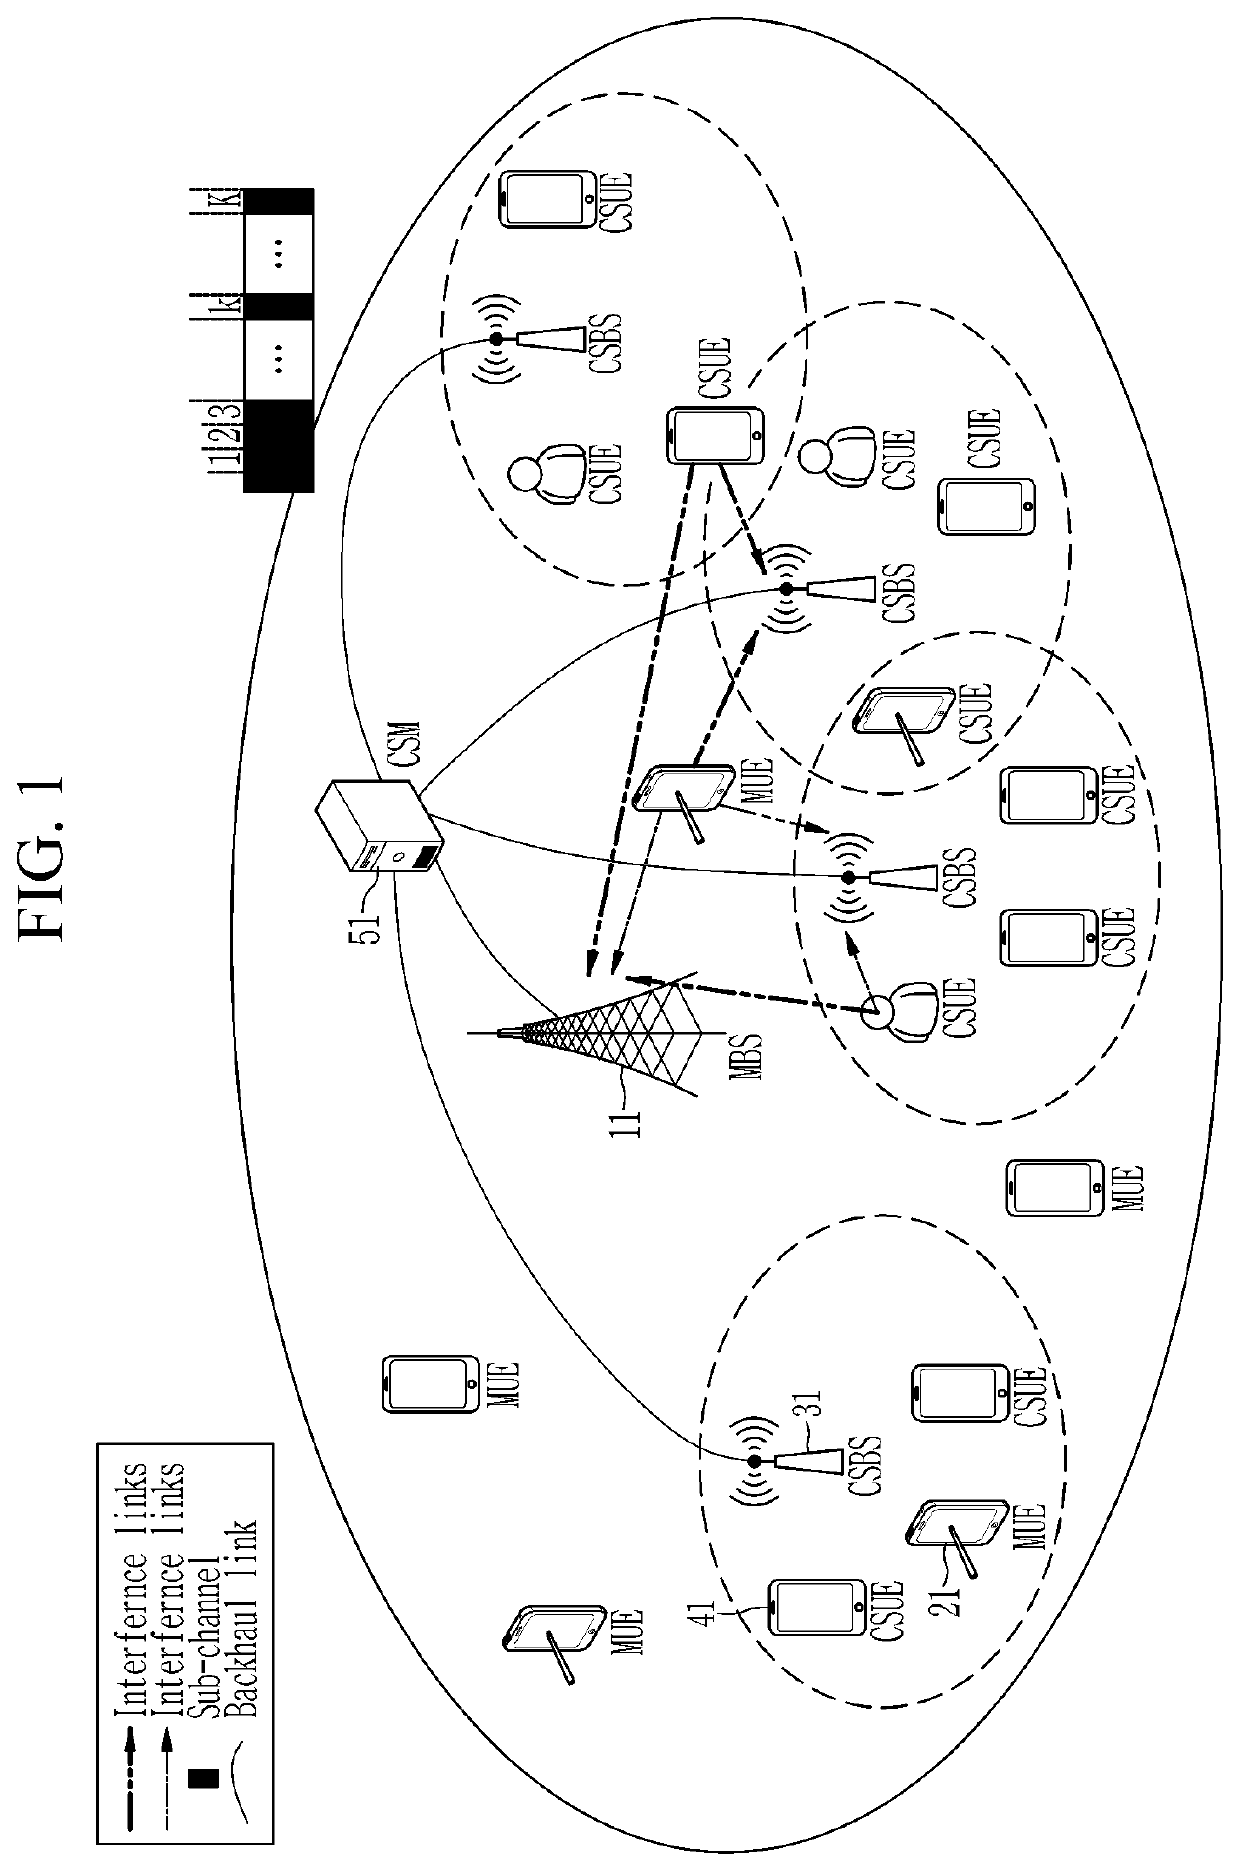 Uplink resource allocation method and cognitive small cell network system for executing same